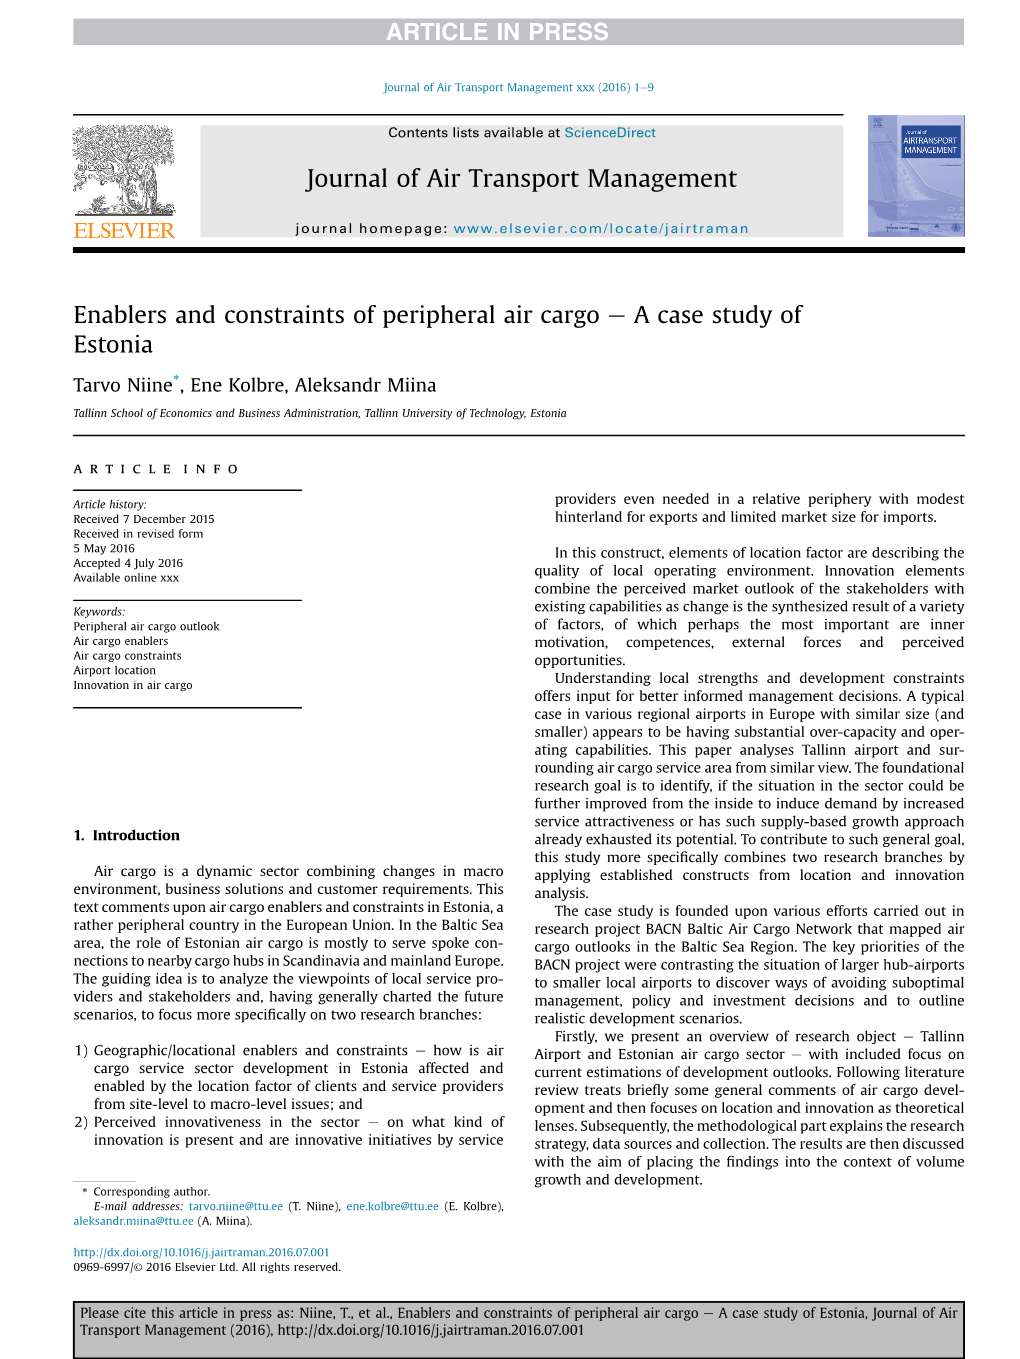 Enablers and Constraints of Peripheral Air Cargo &#X2013; a Case Study Of